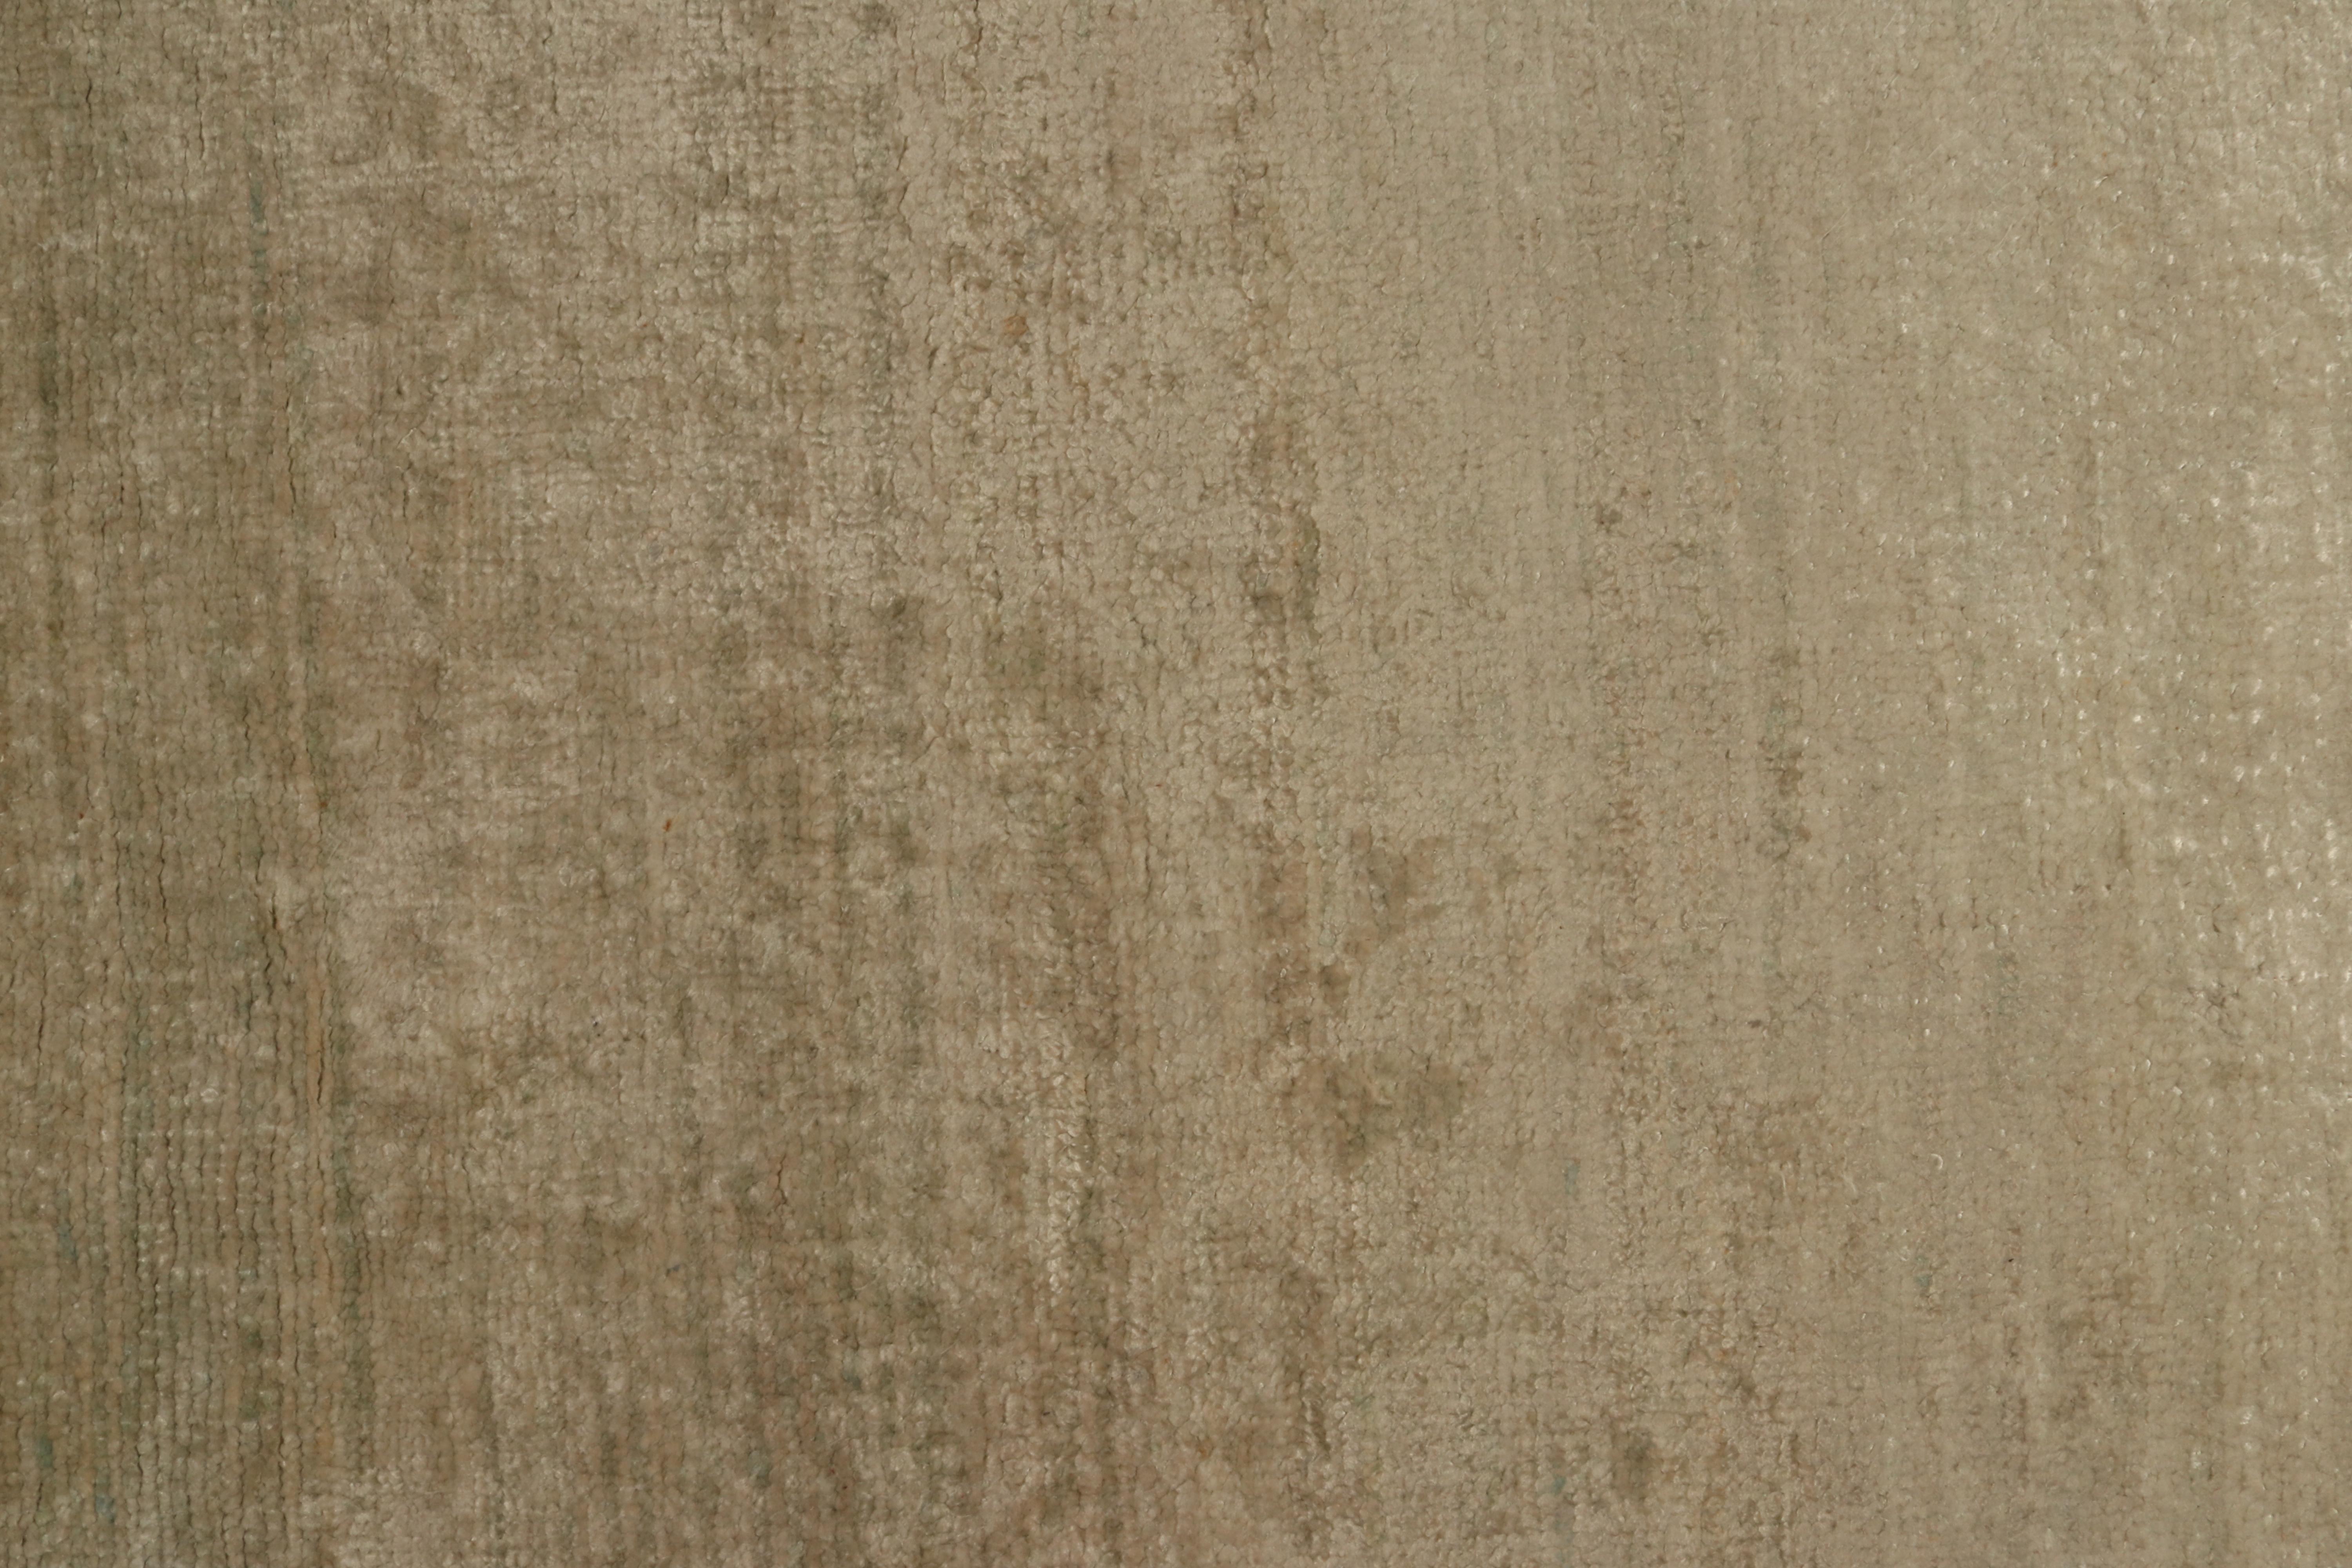 Contemporary Rug & Kilim’s Solid Beige Rug in Tone-on-tone Hand-Knotted Silk Striae For Sale